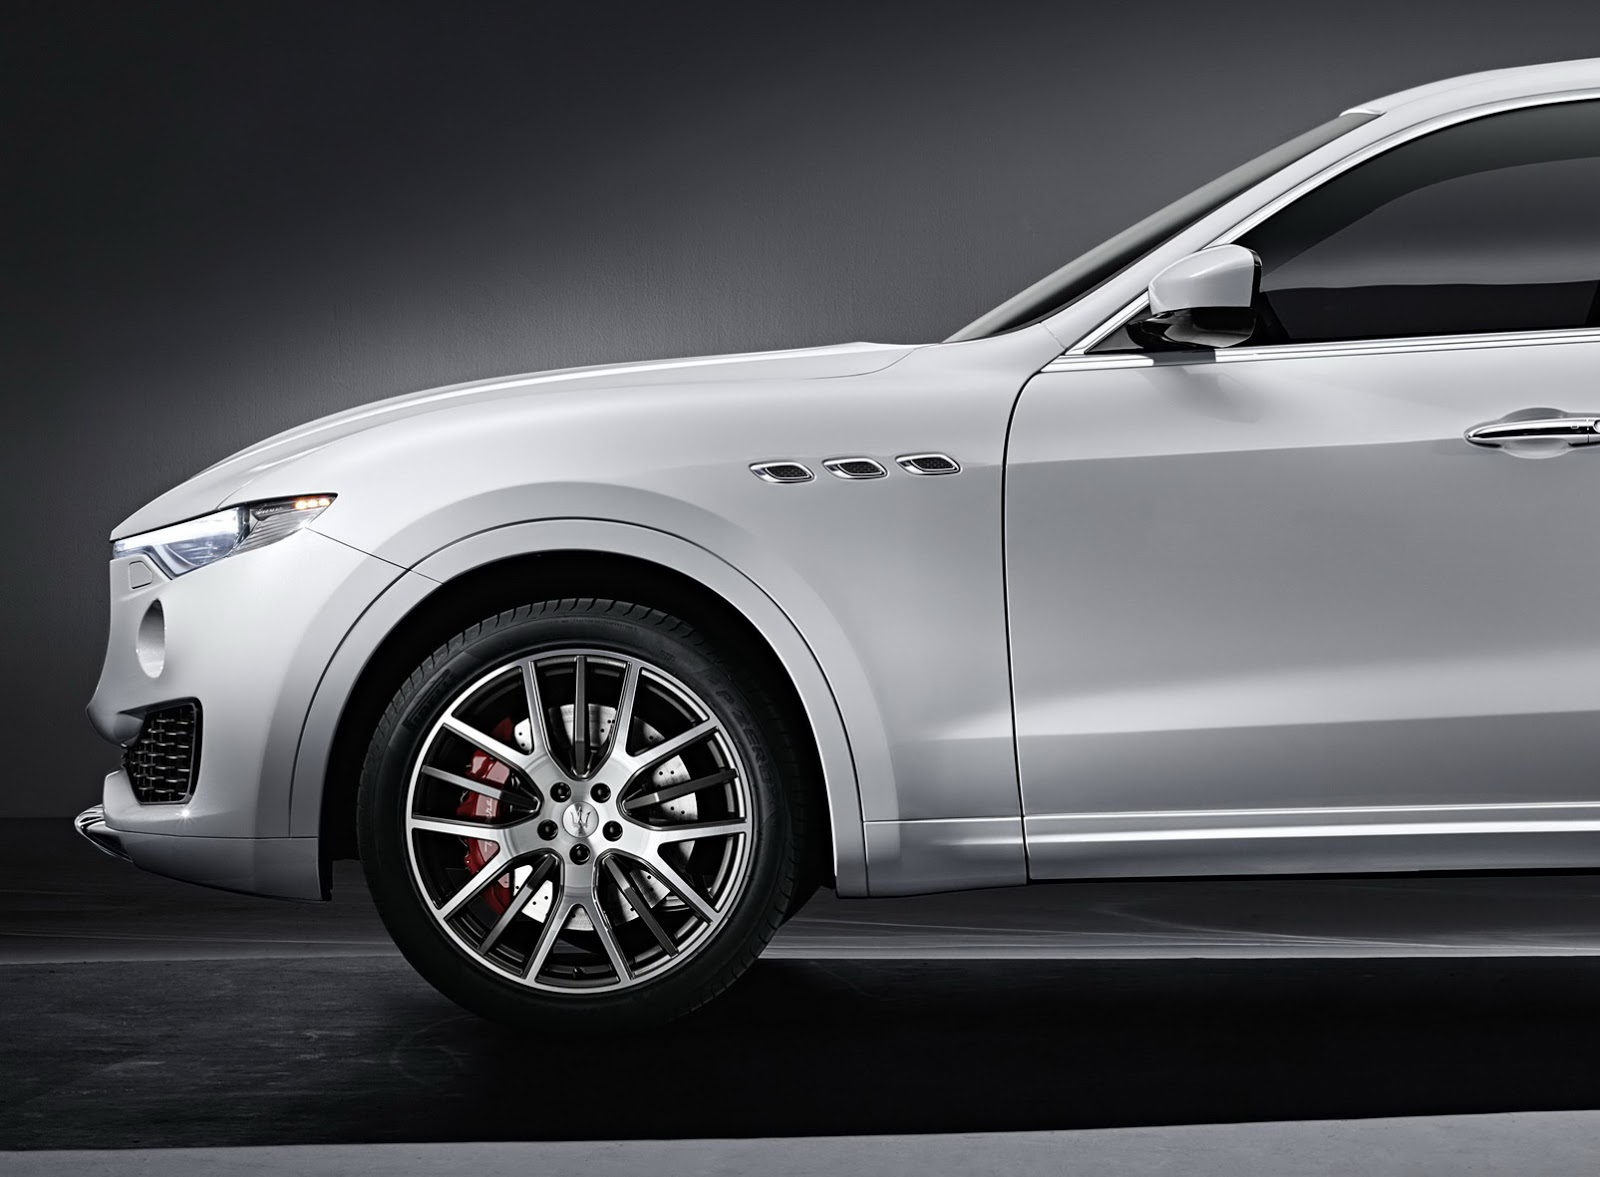 Maserati Levante Best HD Wallpapers   Car Wallpapers HQ